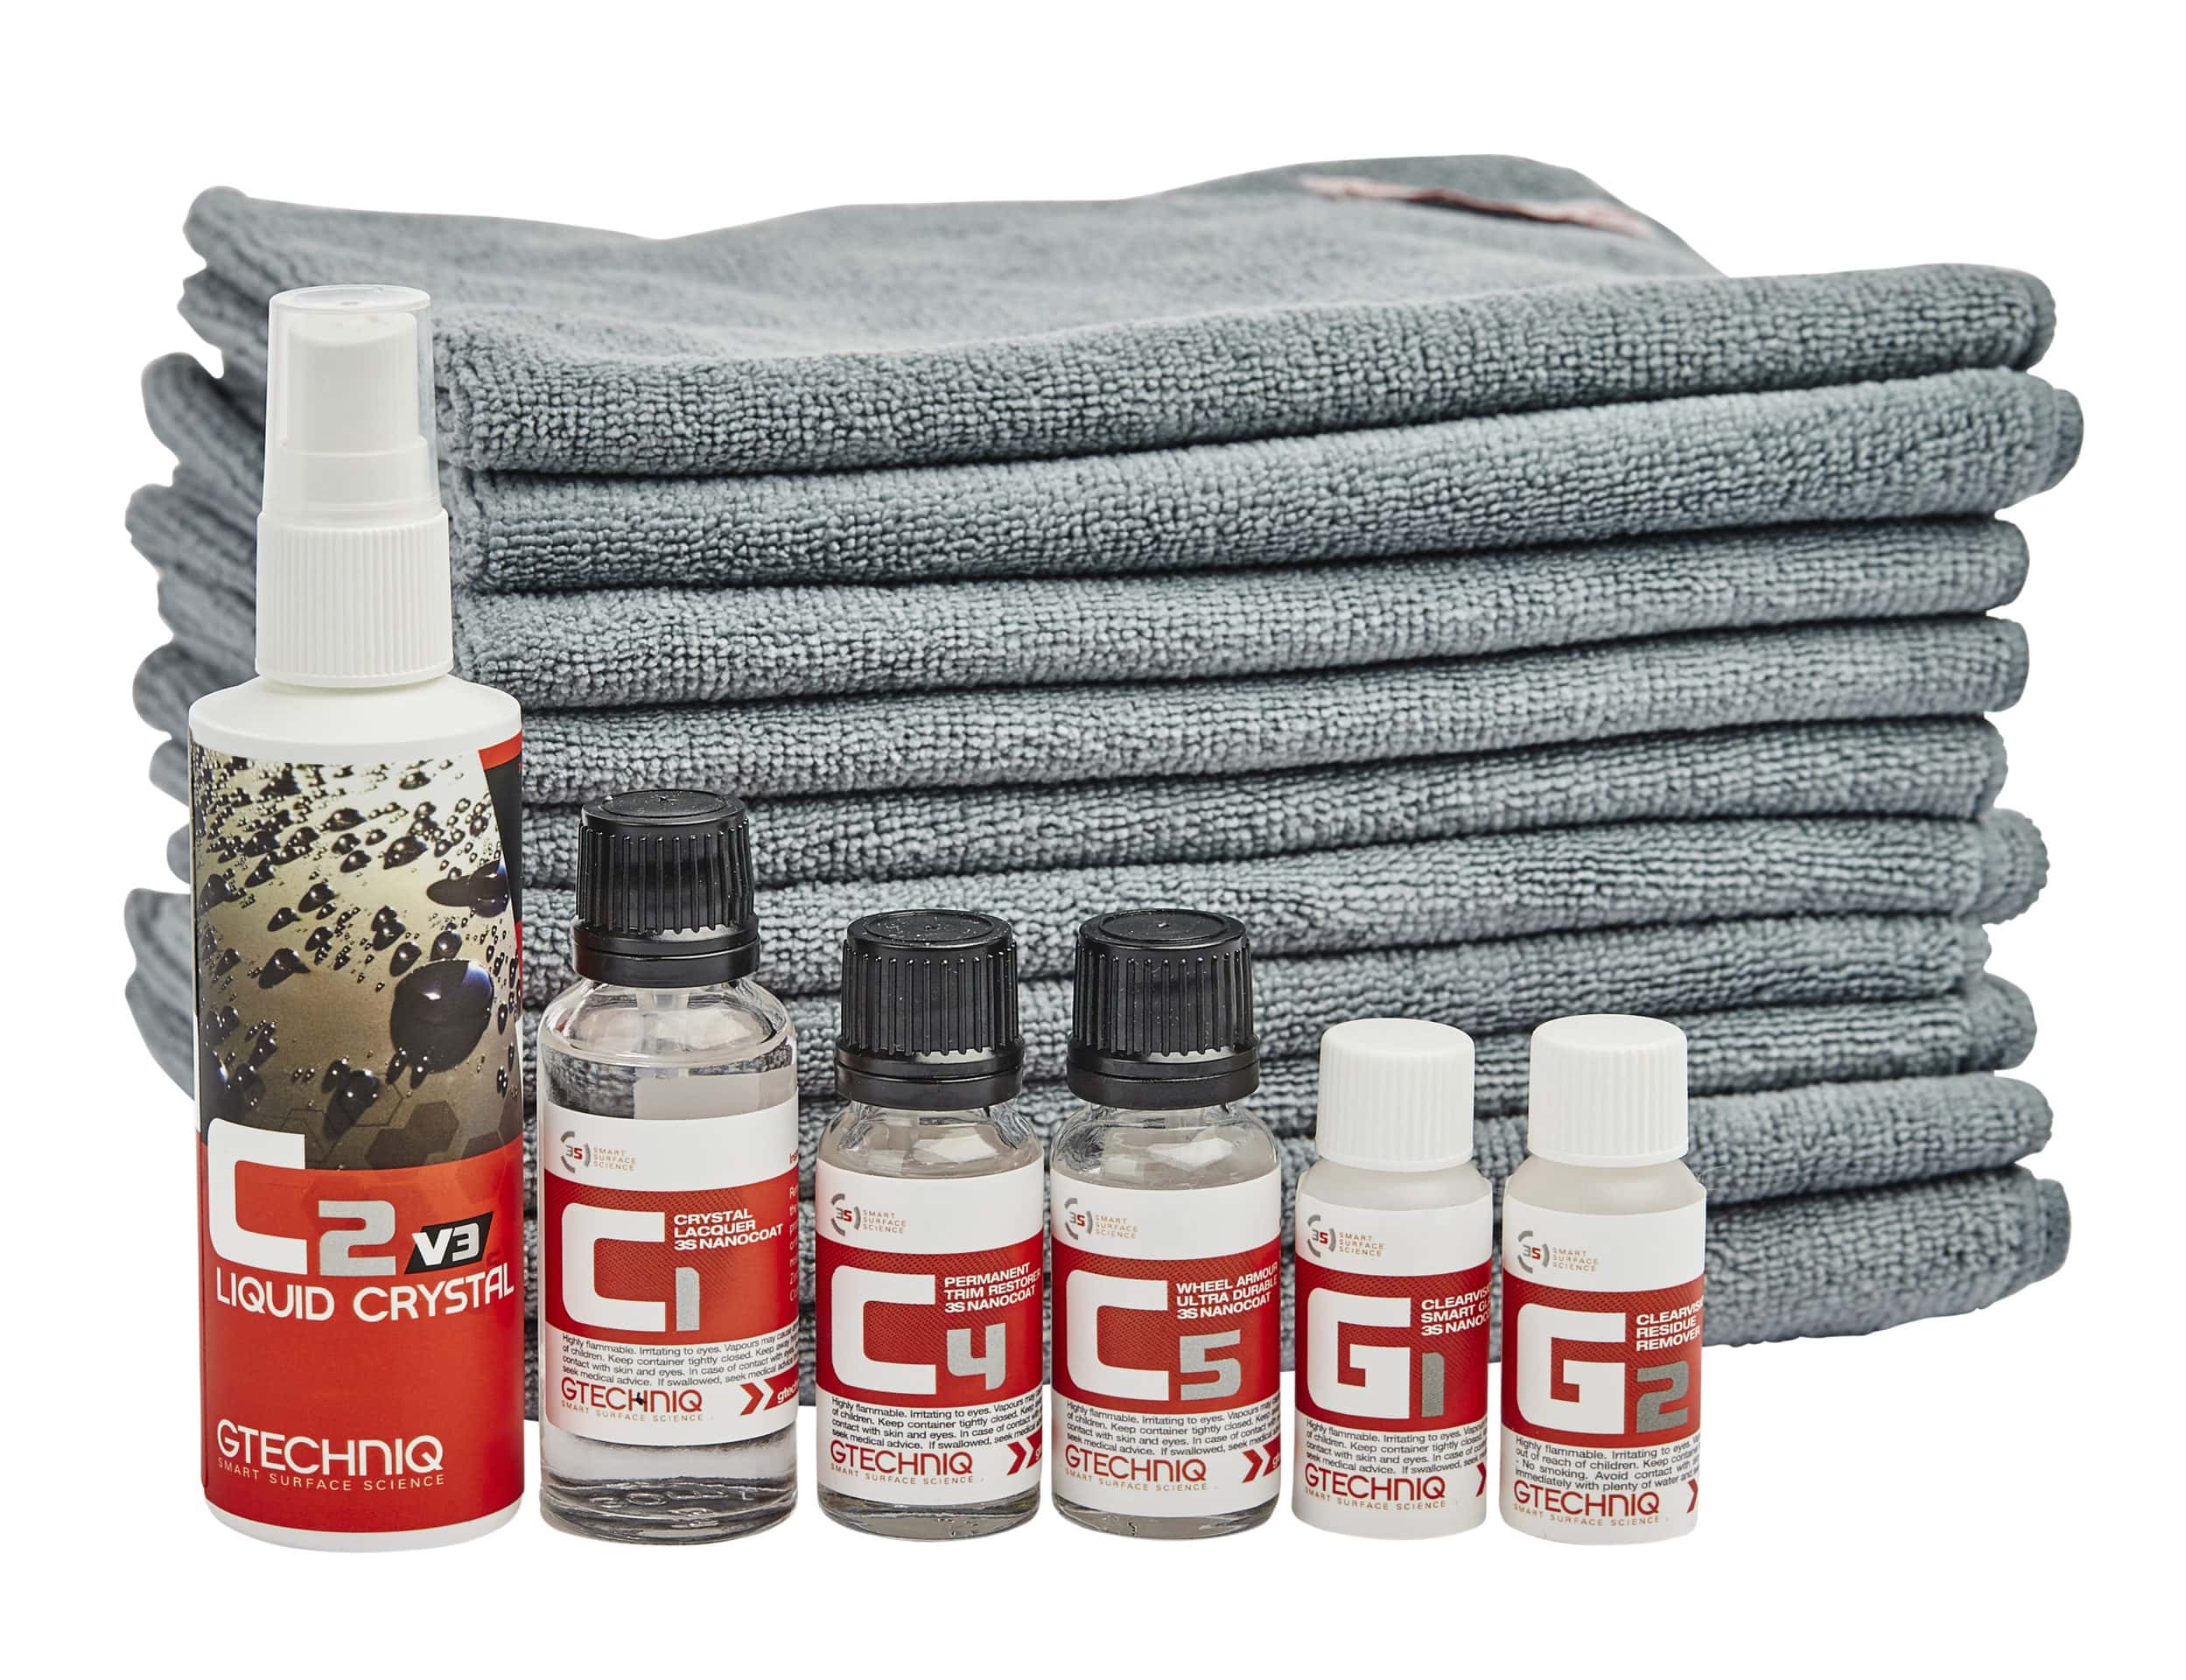 Towels and Gtechniq products